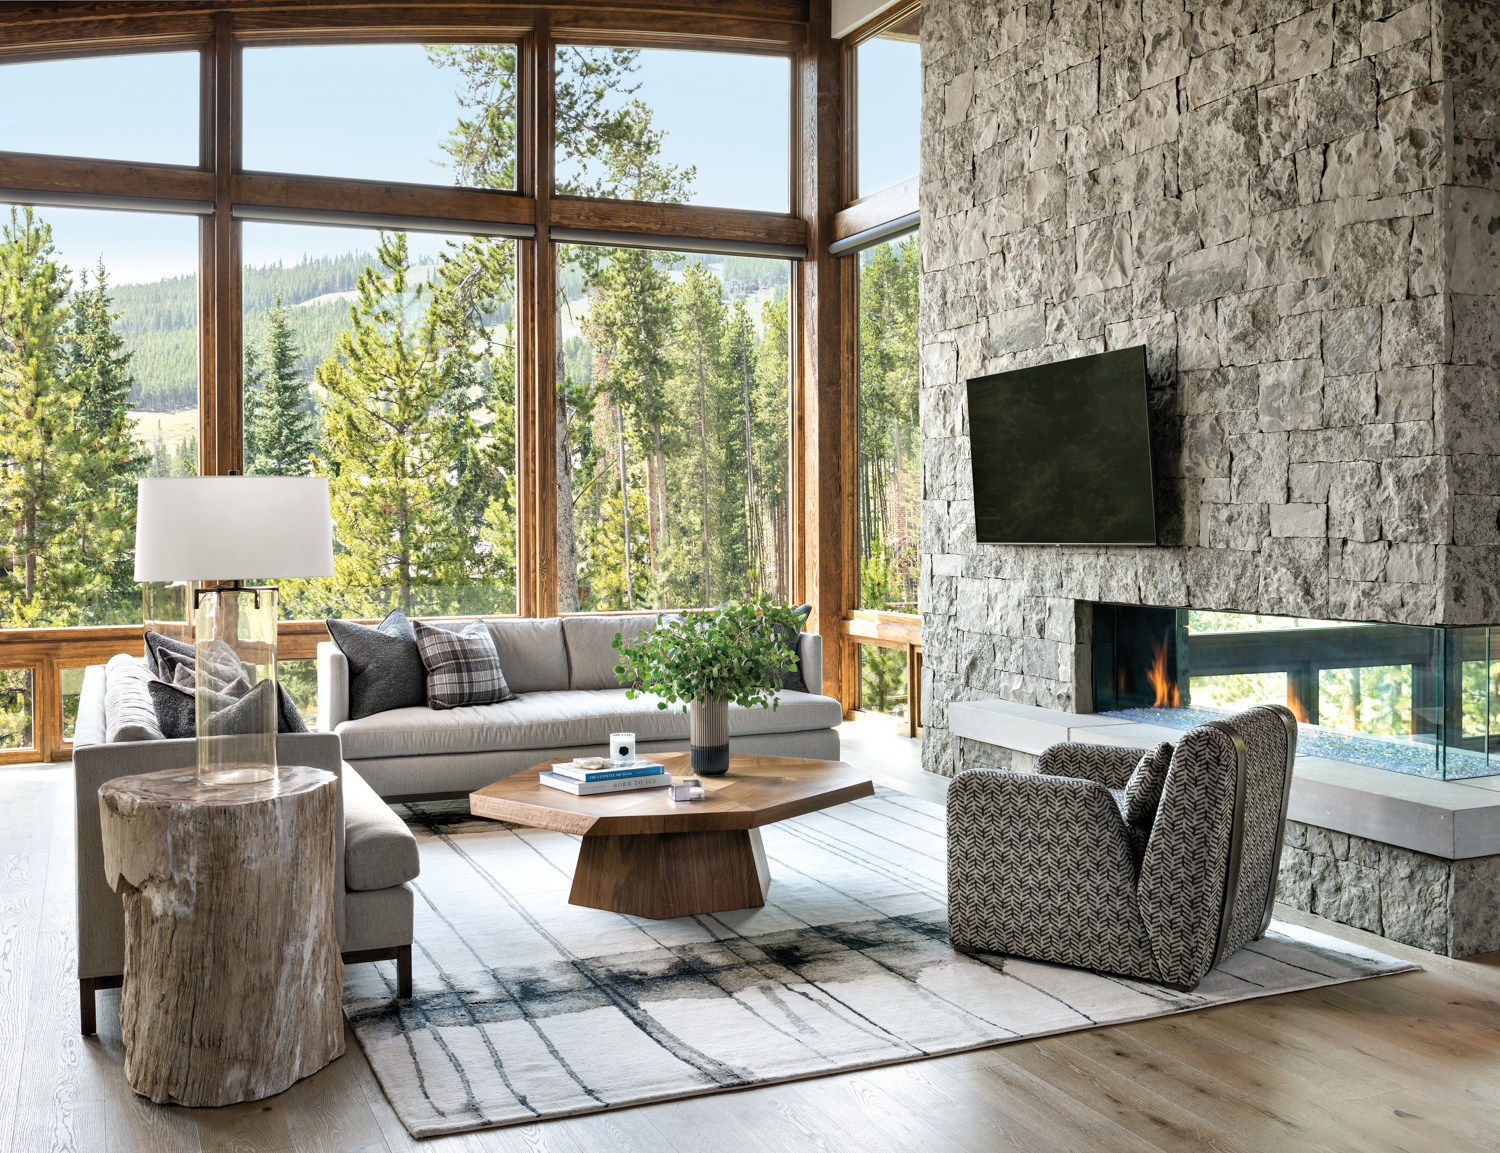 Explore The ‘Soft Modern’ Style Of This Ski-In Breckenridge Home